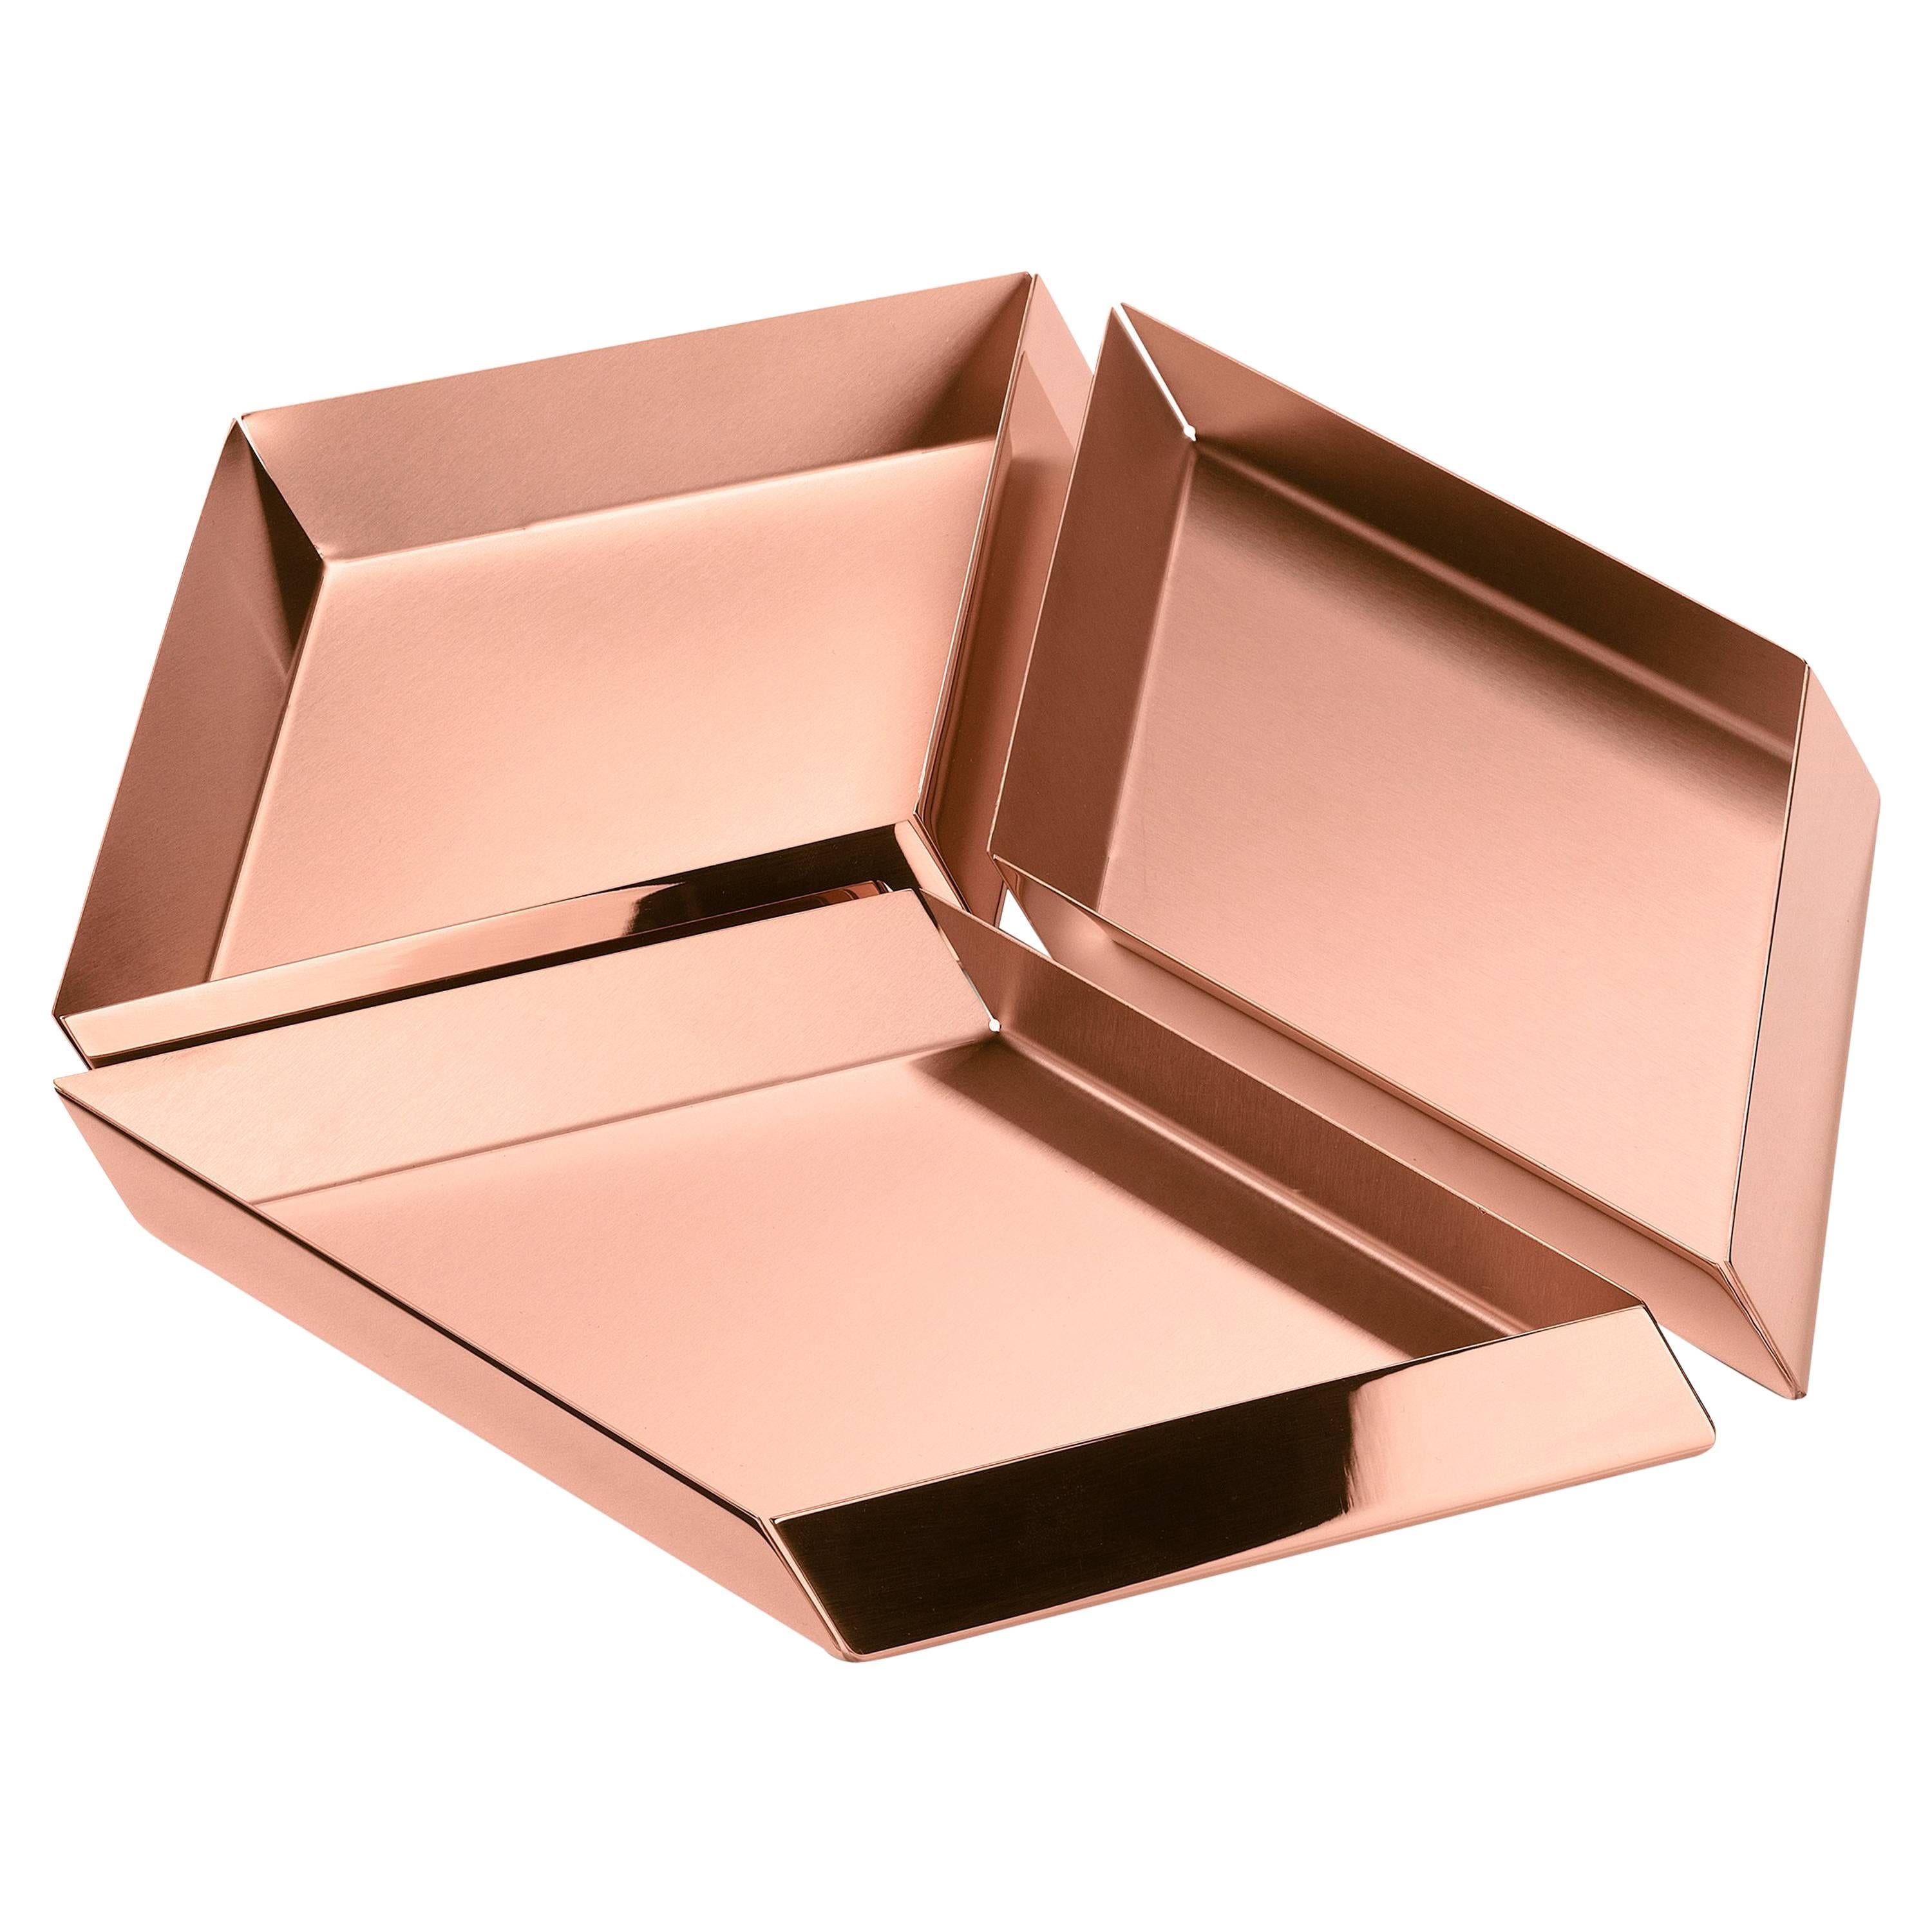 Ghidini 1961 Axonometry Set 2 Large Cube Tray in Rose Gold Finish For Sale